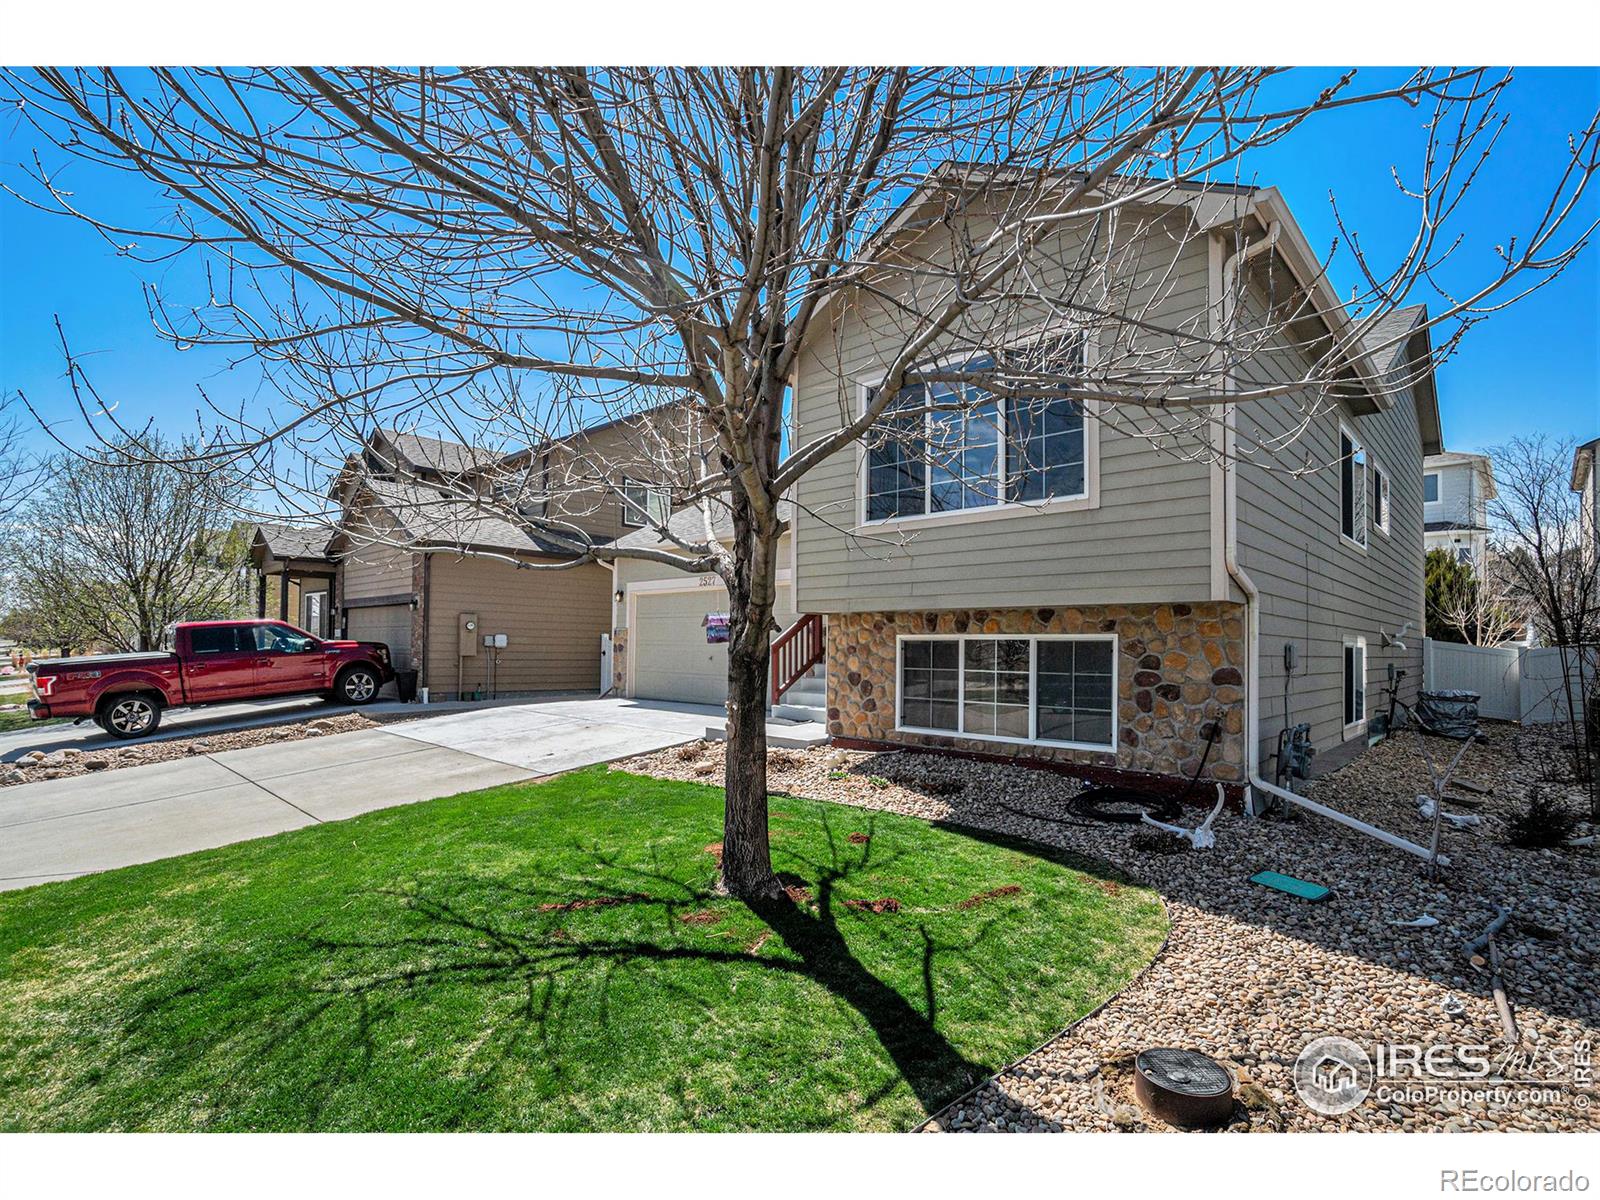 Report Image for 2527  Forecastle Drive,Fort Collins, Colorado